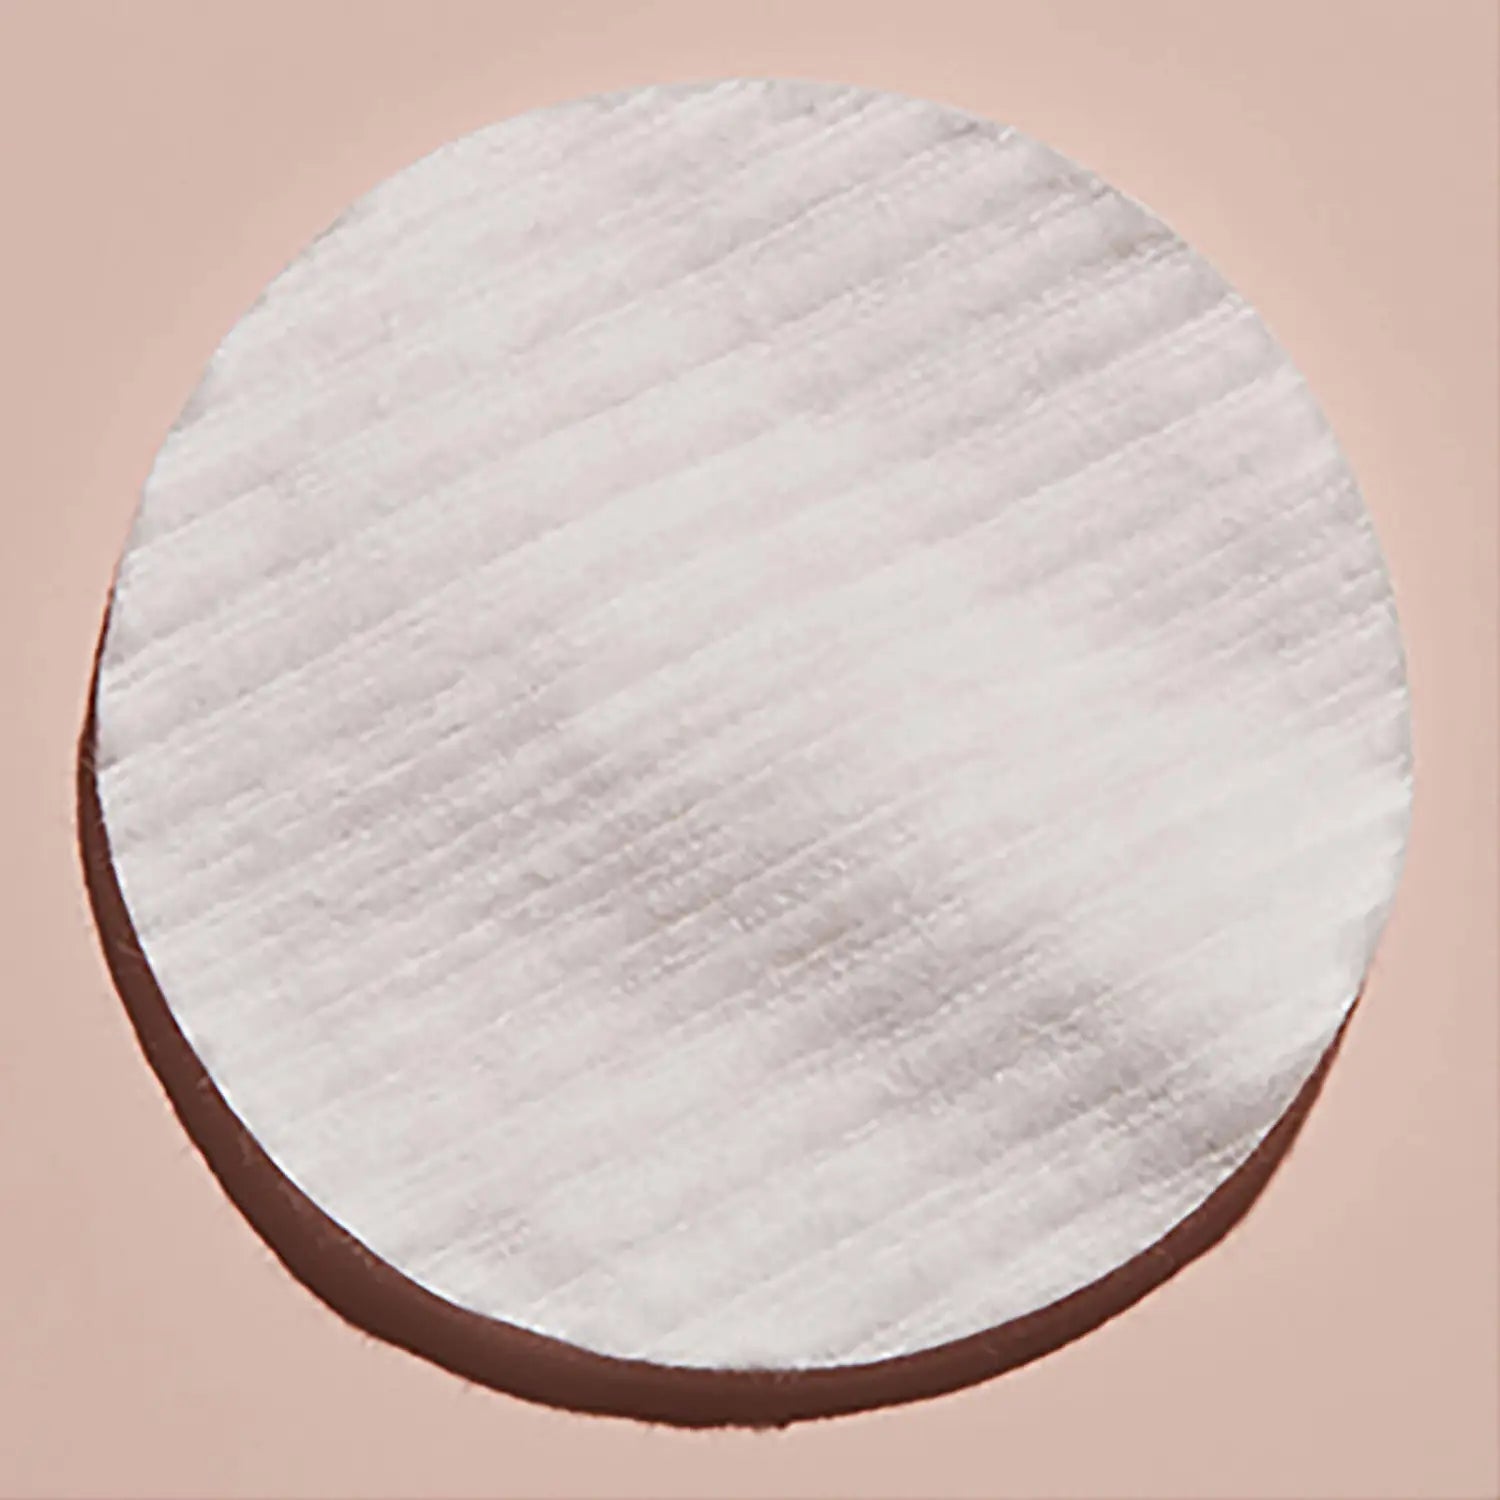 Eve Lom Rescue Peel Pads (60 Pads): A round white circle with a textured surface, representing the exfoliating and resurfacing treatment that gently buffs away dead skin, revealing a smoother, brighter, and revitalized complexion.